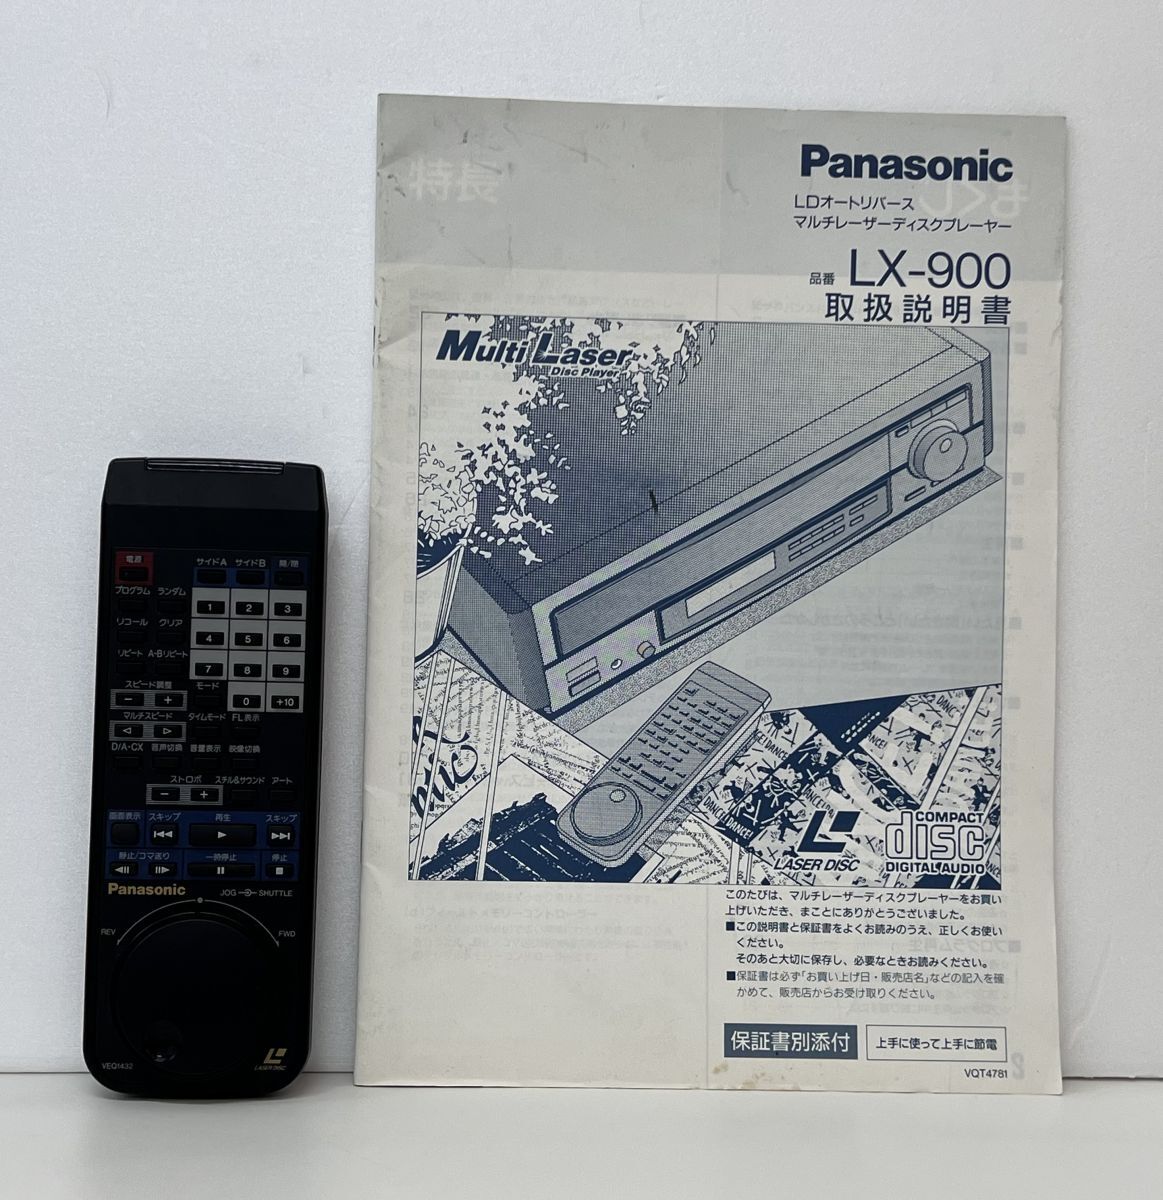  remote control / junk treatment / Panasonic VEQ1432 / LX-900 correspondence / operation not yet verification / owner manual attaching .[A010]